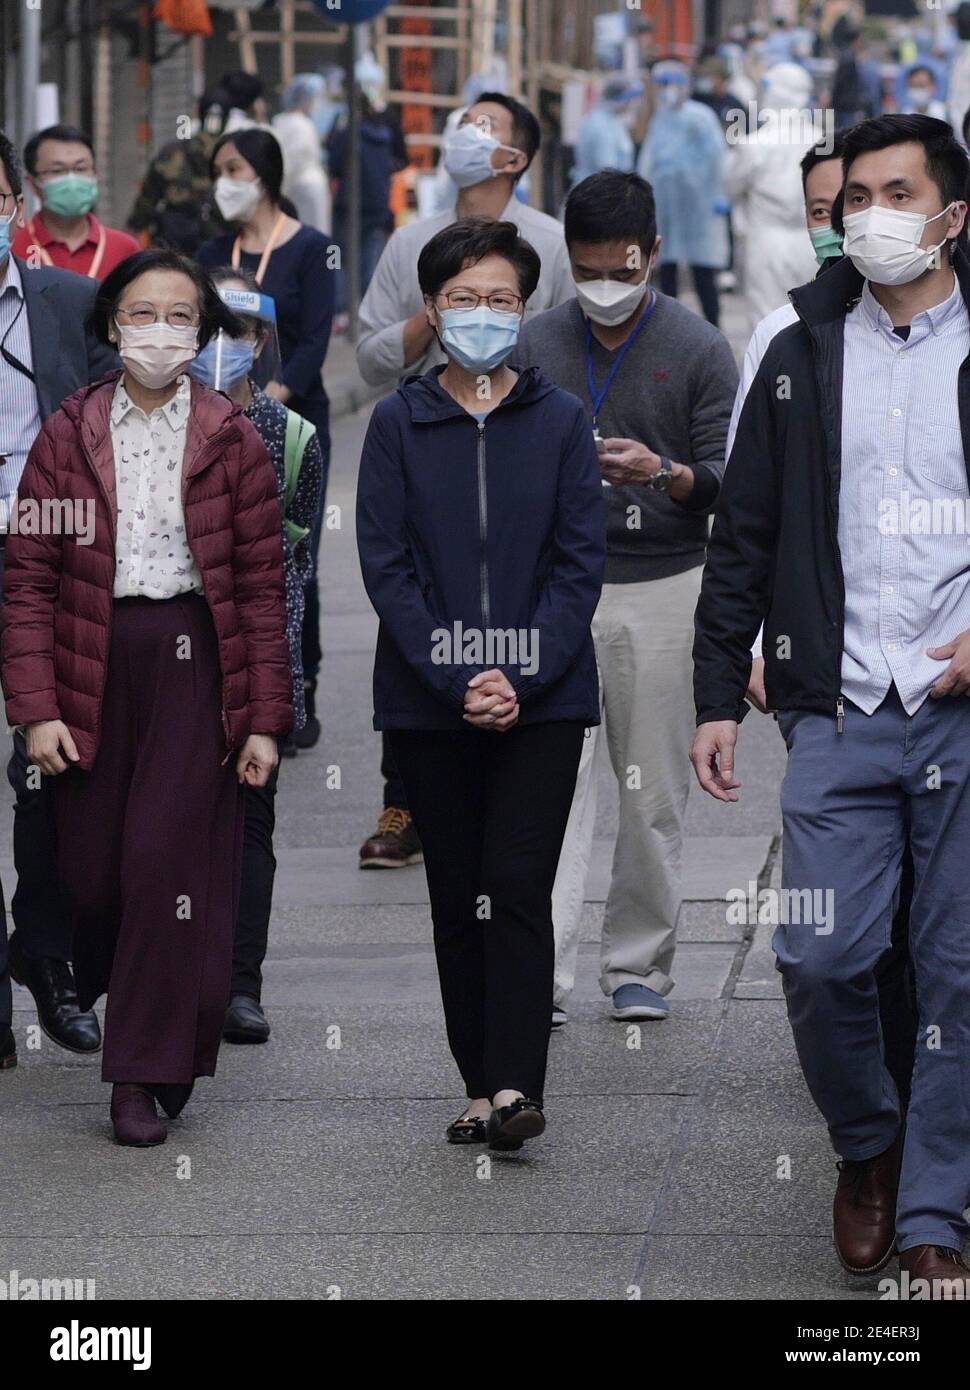 Hong Kong, China. 23rd Jan, 2021. Chief Executive of the Hong Kong Special Administrative Region Carrie Lam (C) inspects compulsory COVID-19 testing in a virus-stricken area in Kowloon, Hong Kong, south China, Jan. 23, 2021. TO GO WITH 'Roundup: A year after 1st case found, Hong Kong's COVID-19 tally surpasses 10,000' Credit: Wang Shen/Xinhua/Alamy Live News Stock Photo